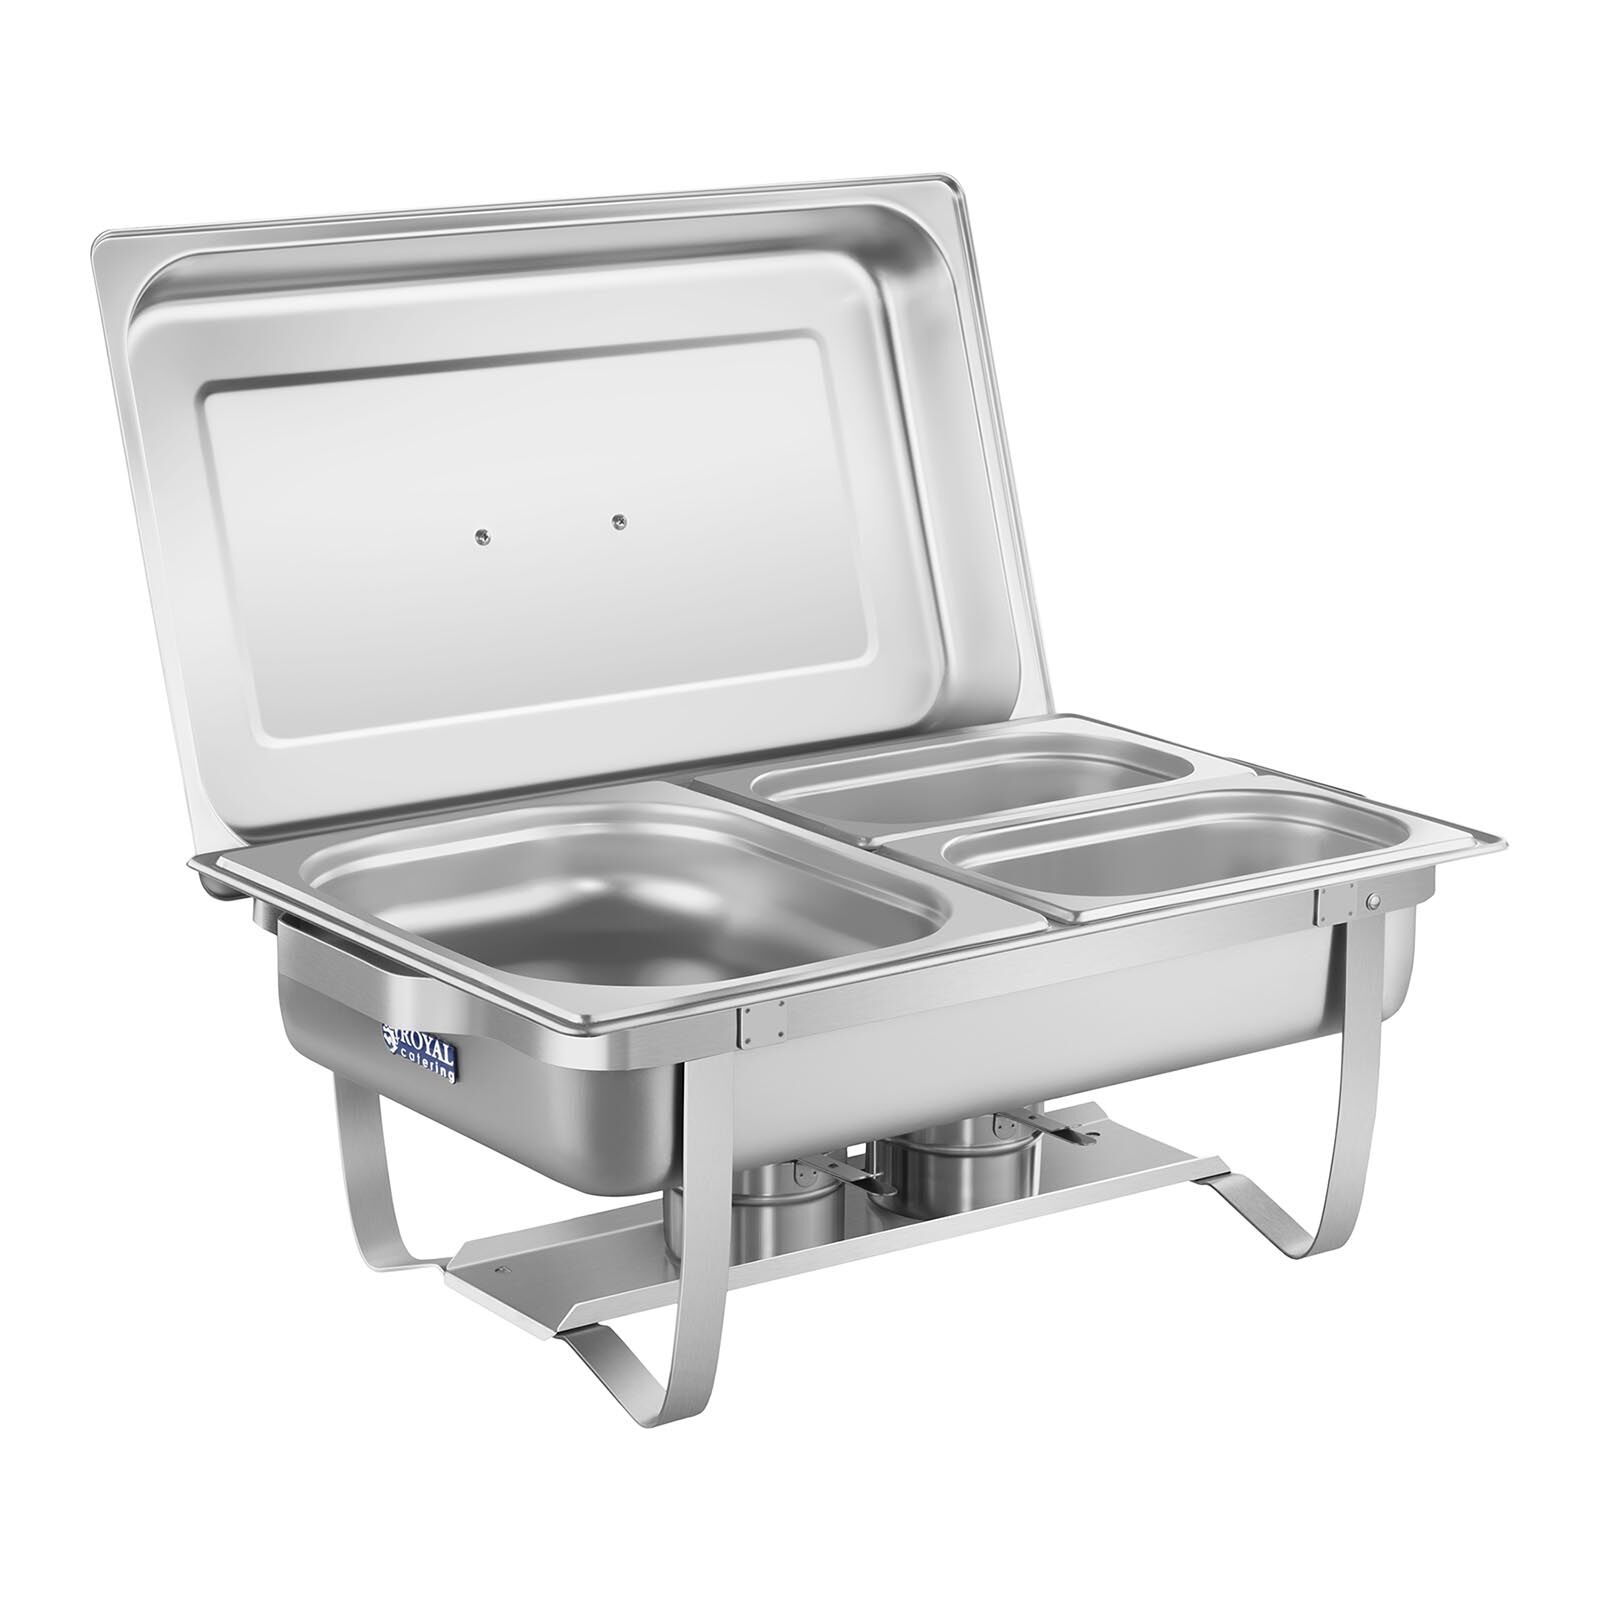 Royal Catering Chafing Dish - 53 cm - inkl. GN Behälter 10010879